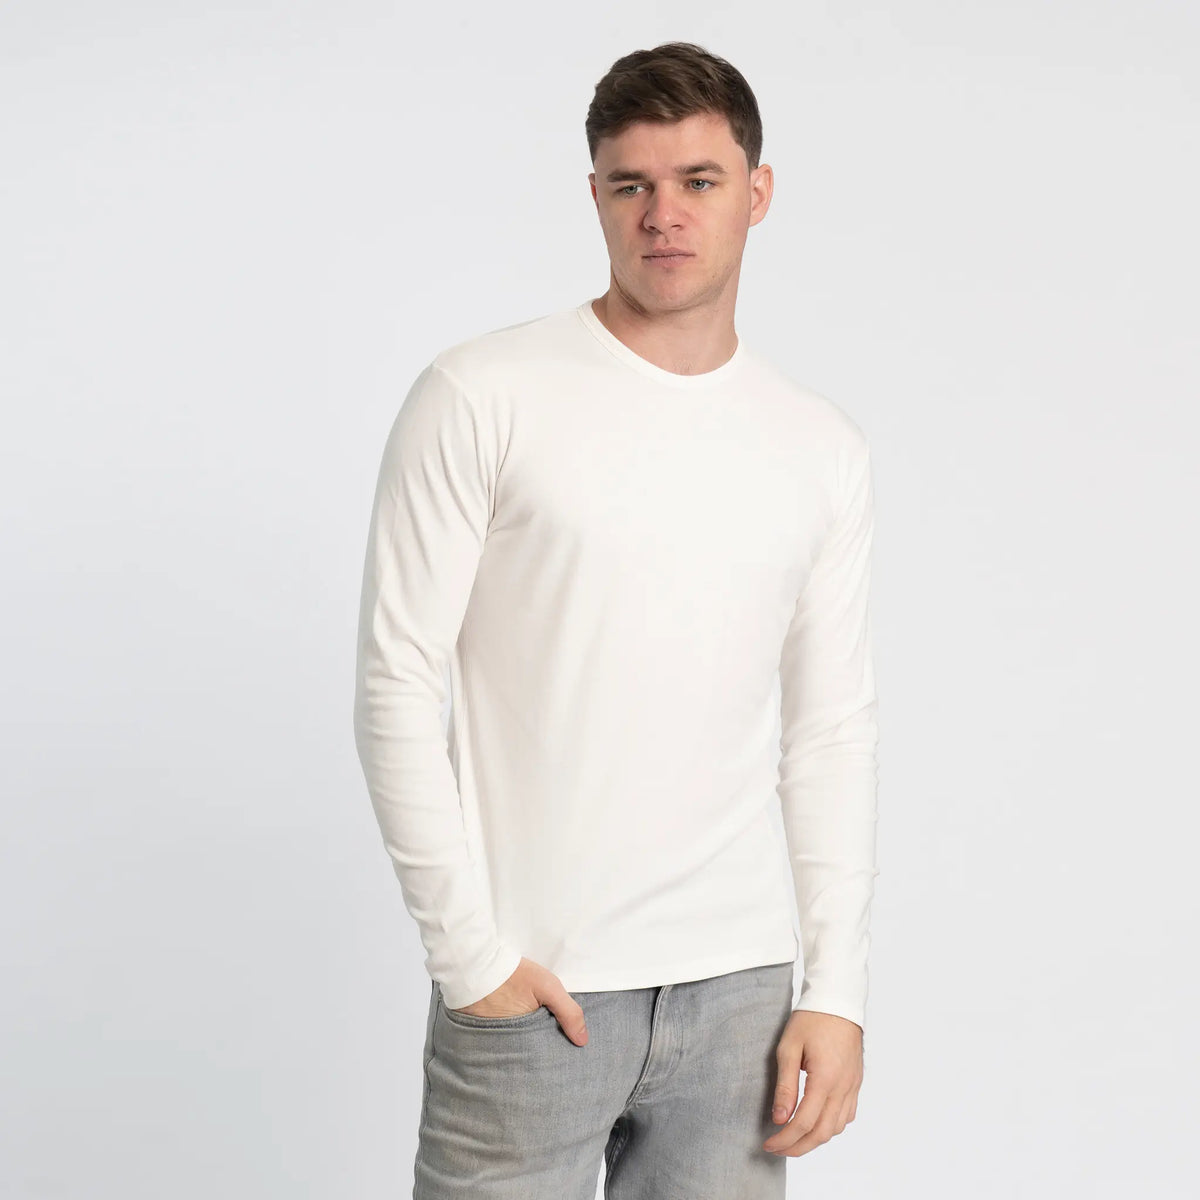 mens comfortable fit tshirt long sleeve color white